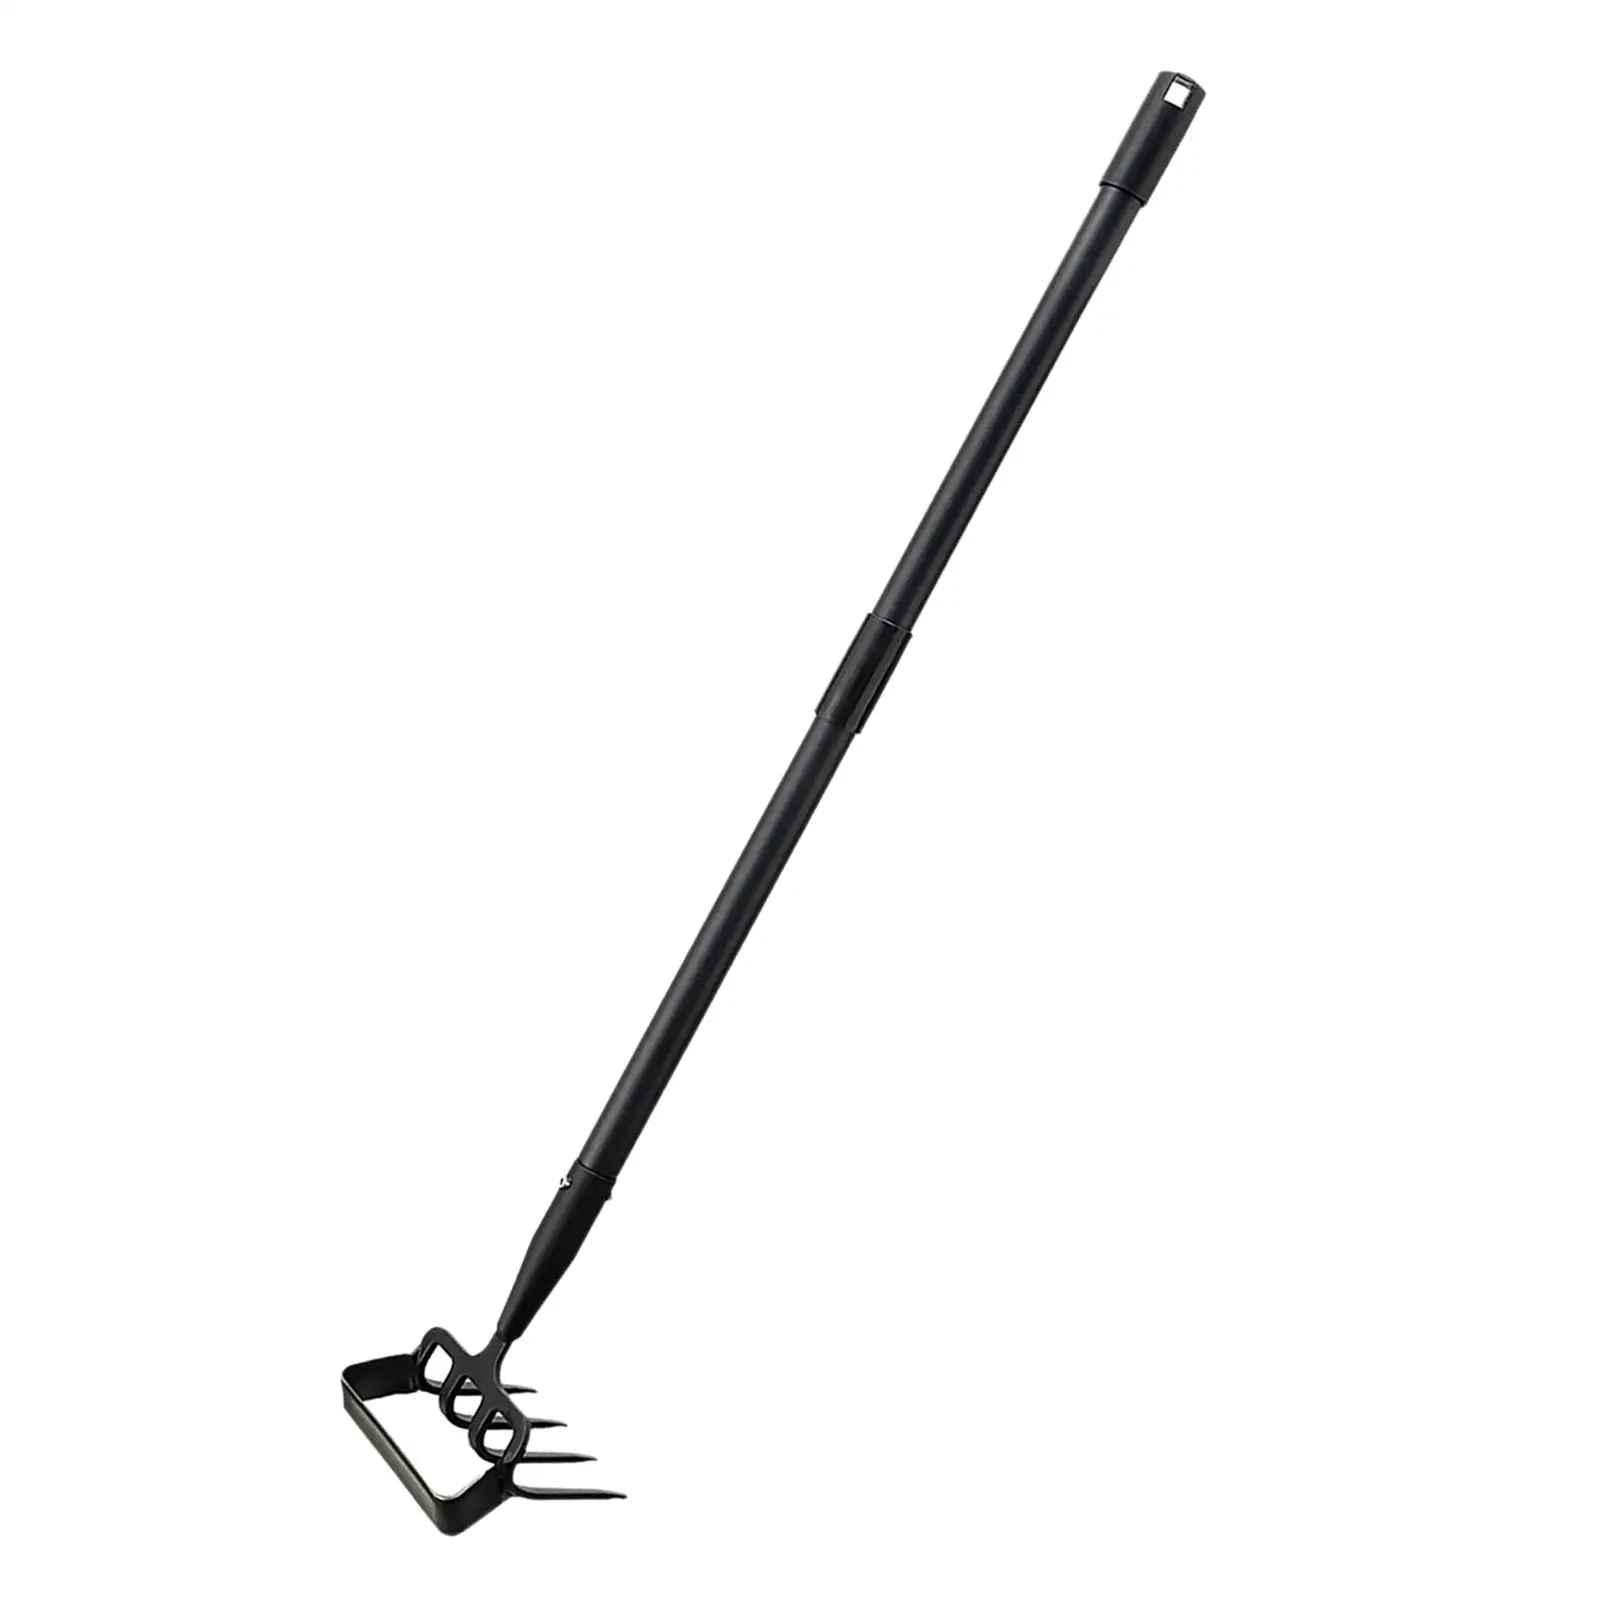 Stirrup Hoe and Cultivator 2 in 1 Weeding Artifact Lightweight Hoe Garden Tool for Weeding Plowing Vegetable Lawn Gardening